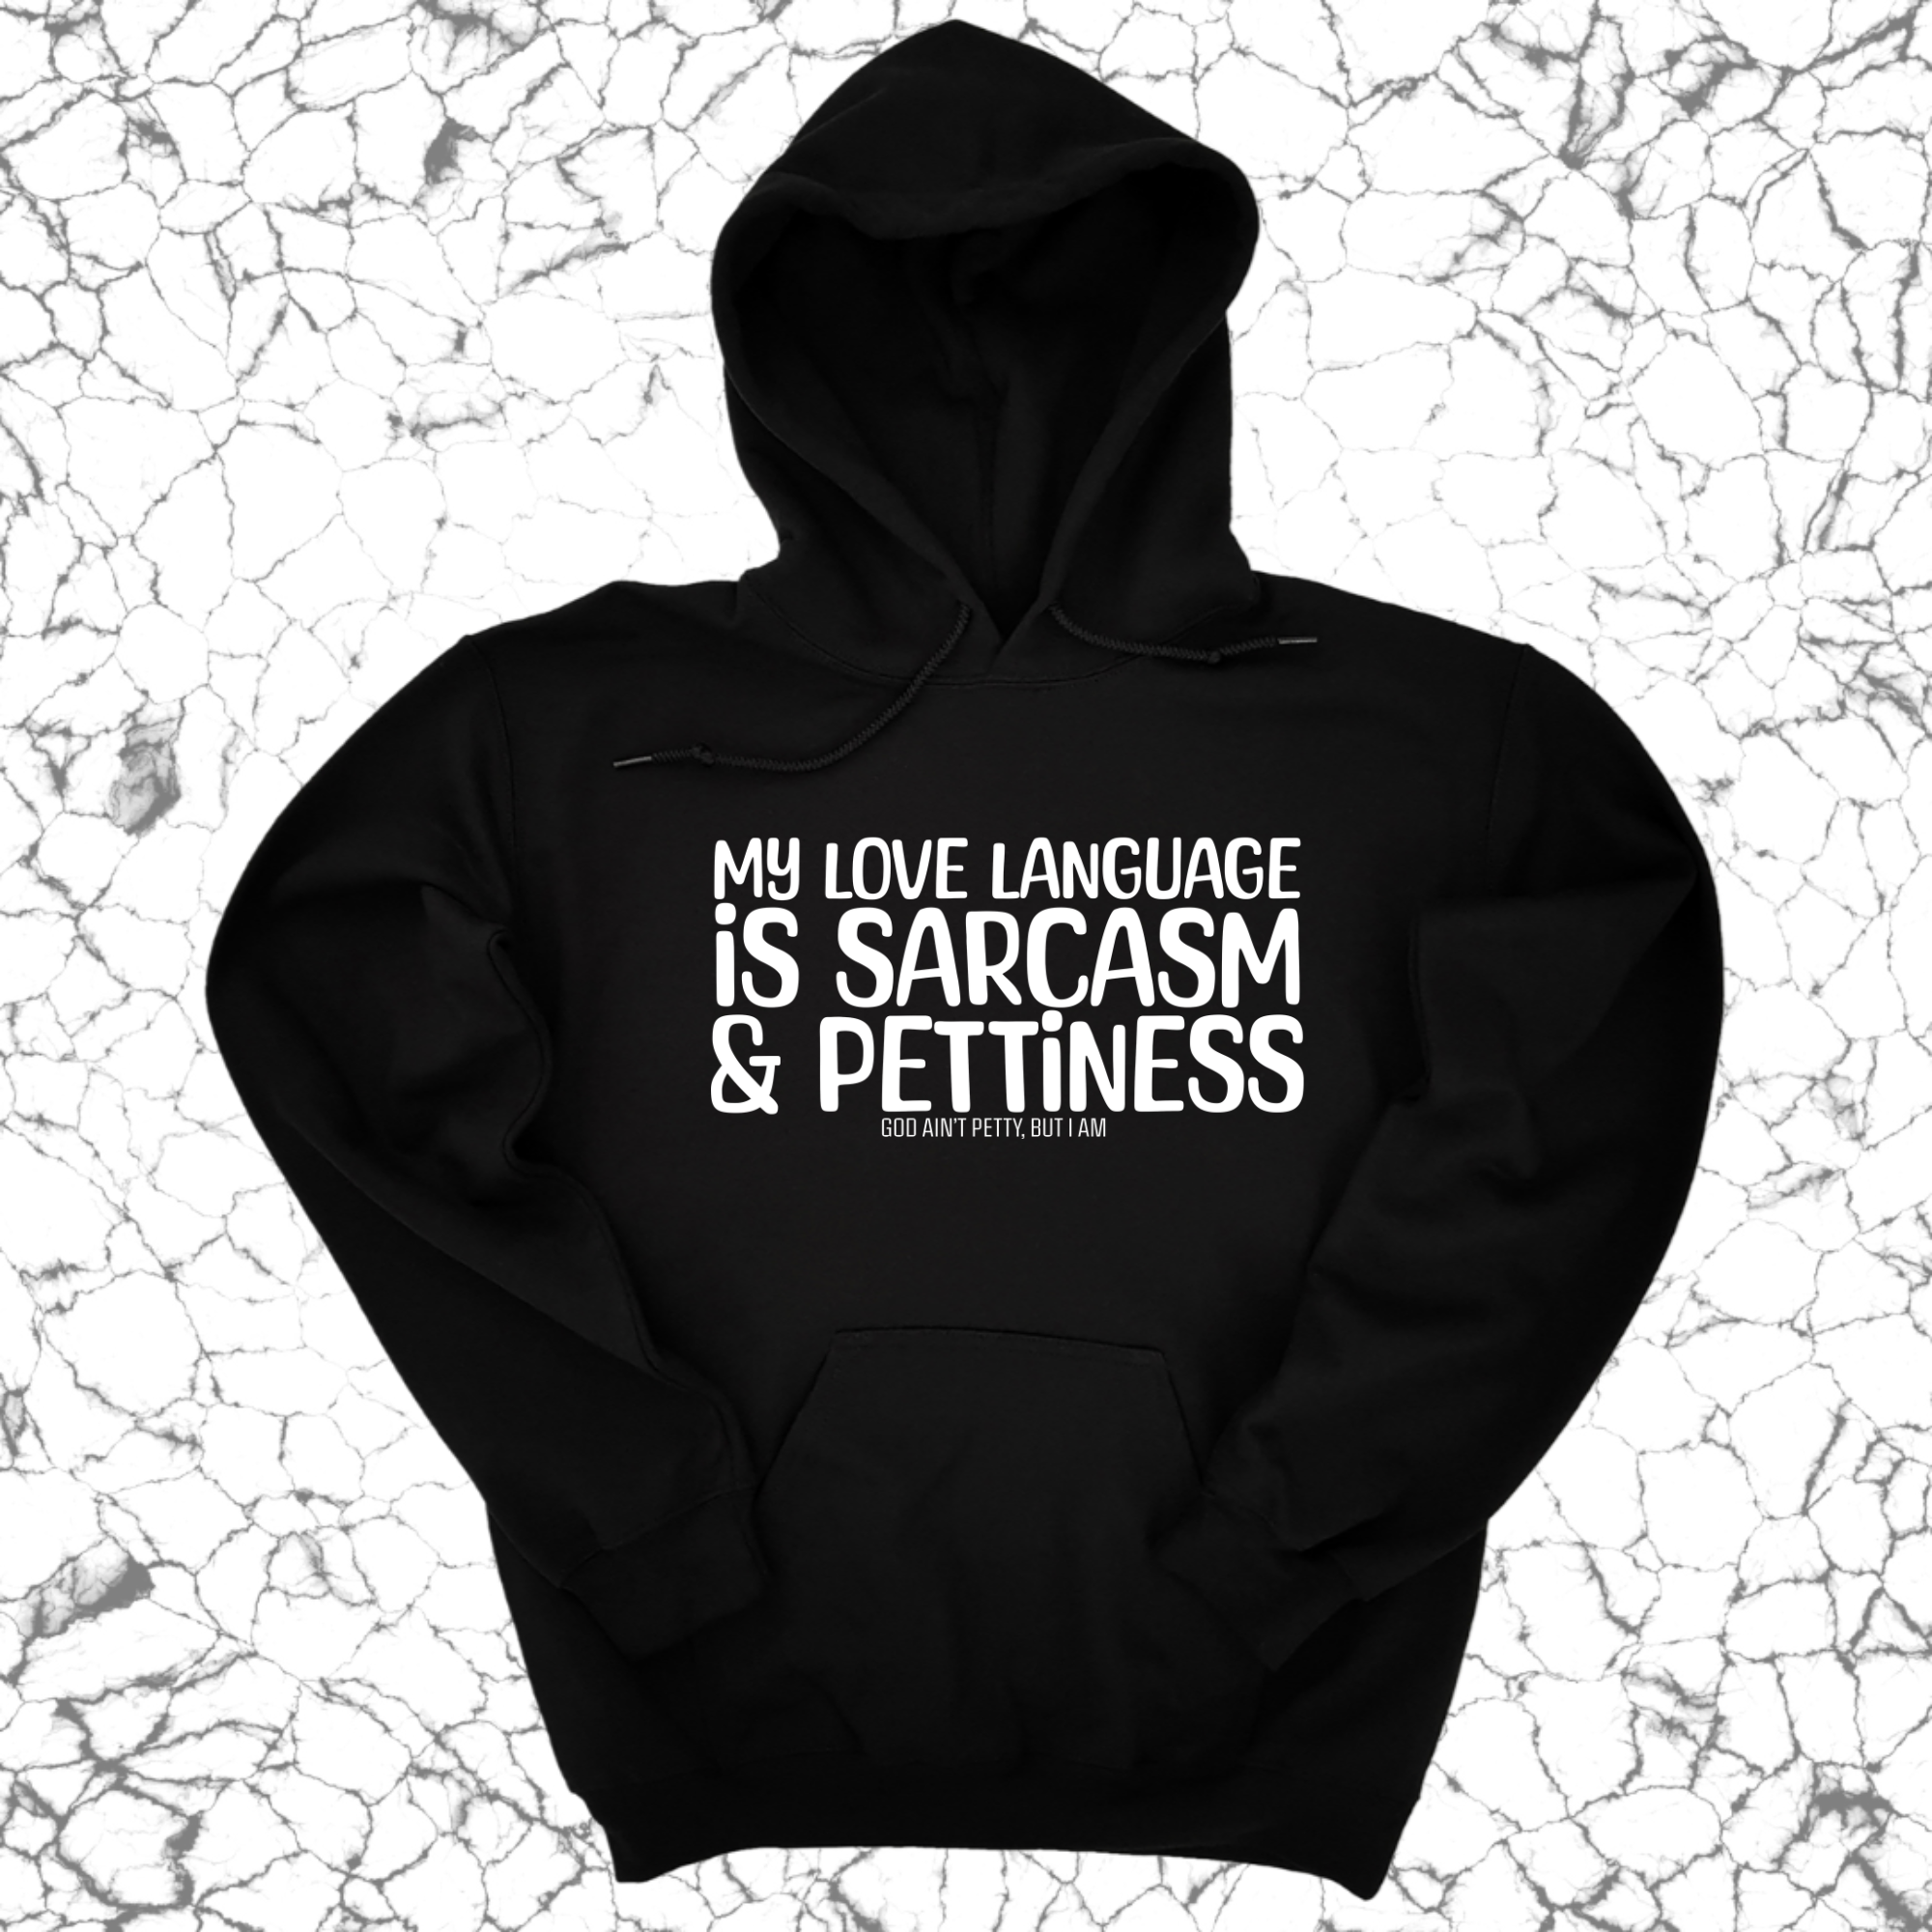 My Love language is sarcasm and pettiness Unisex Hoodie-Hoodie-The Original God Ain't Petty But I Am